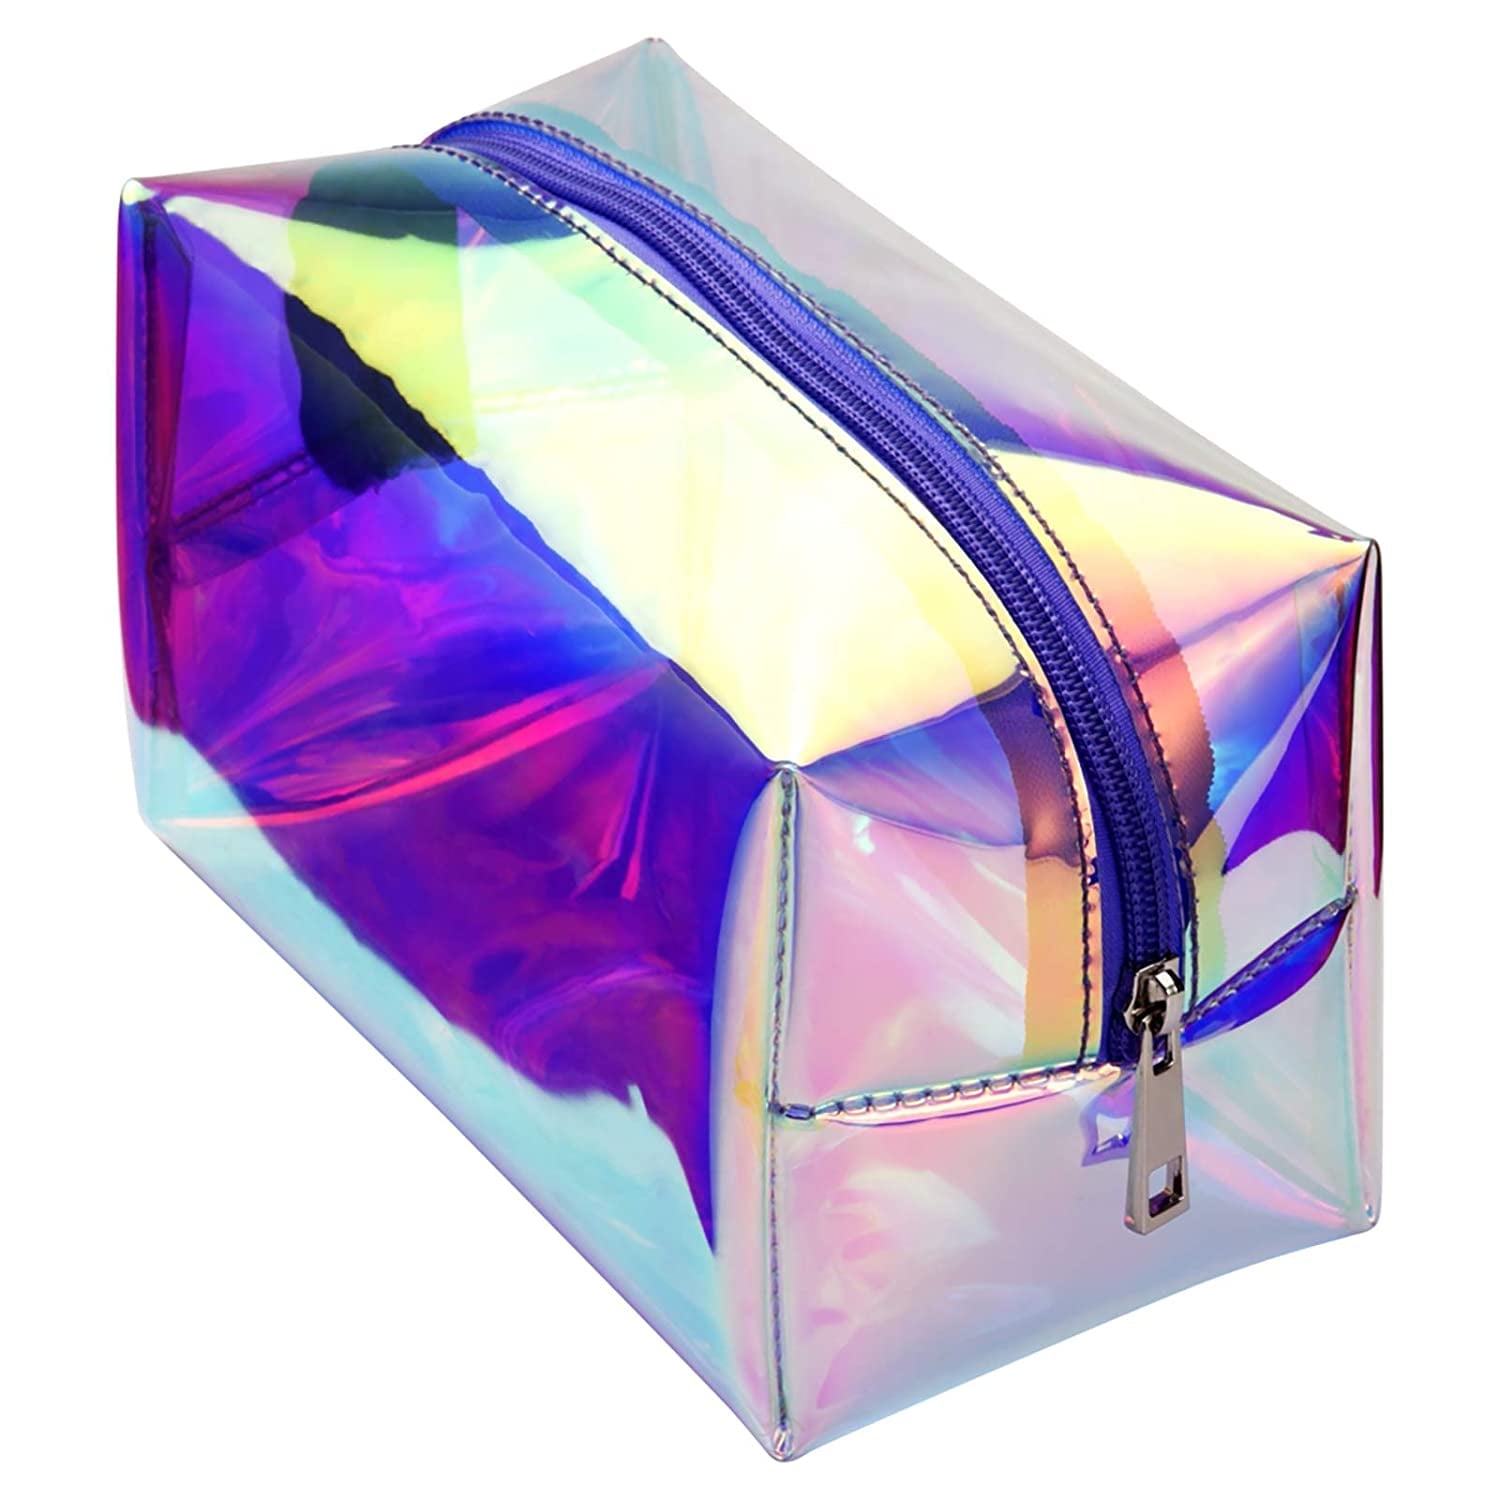 ZMLM Stocking Stuffers Gift for Kids - 165 Holographic Rainbow